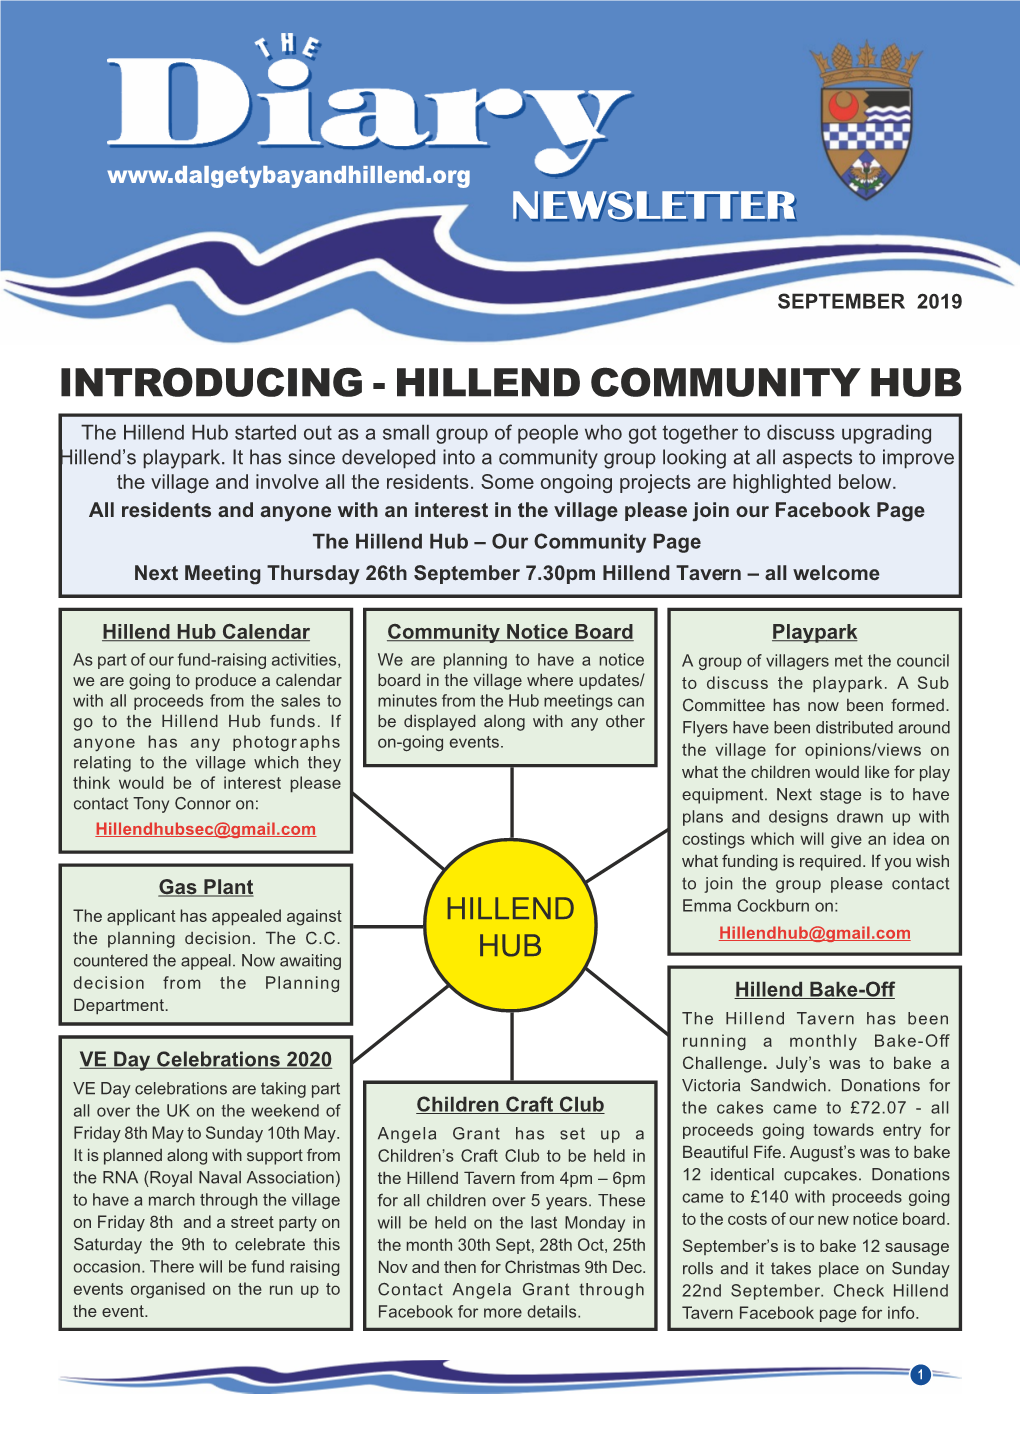 HILLEND COMMUNITY HUB the Hillend Hub Started out As a Small Group of People Who Got Together to Discuss Upgrading Hillend’S Playpark